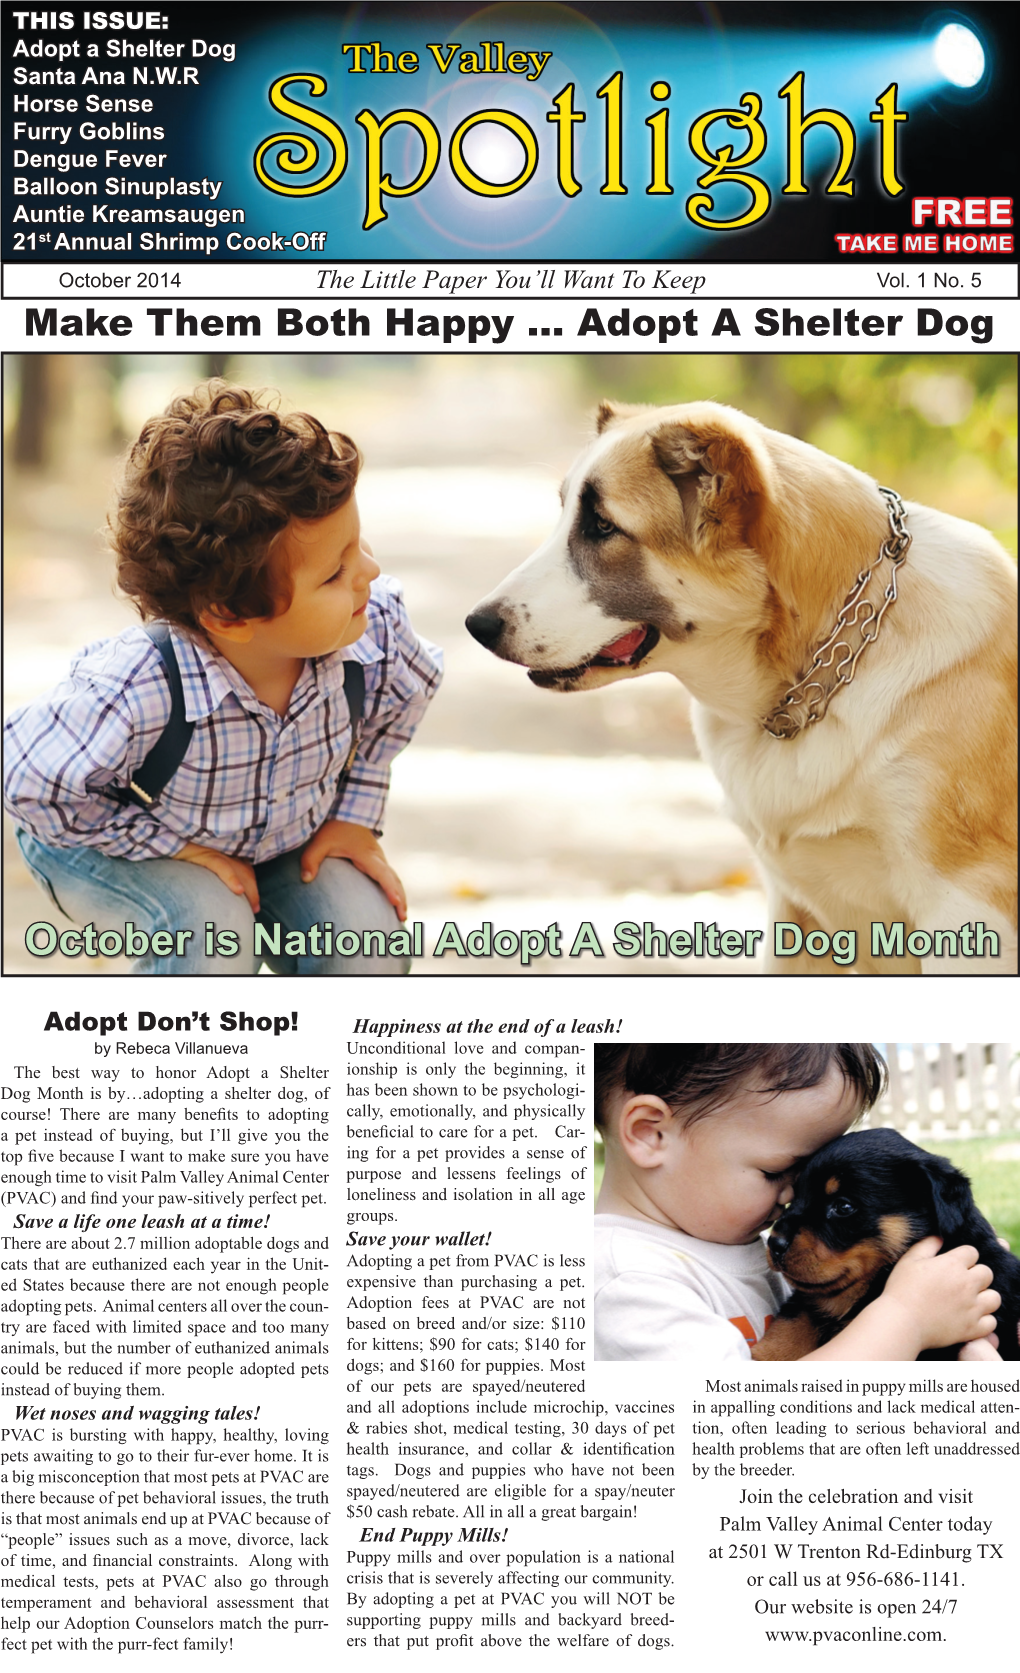 October Is National Adopt a Shelter Dog Month